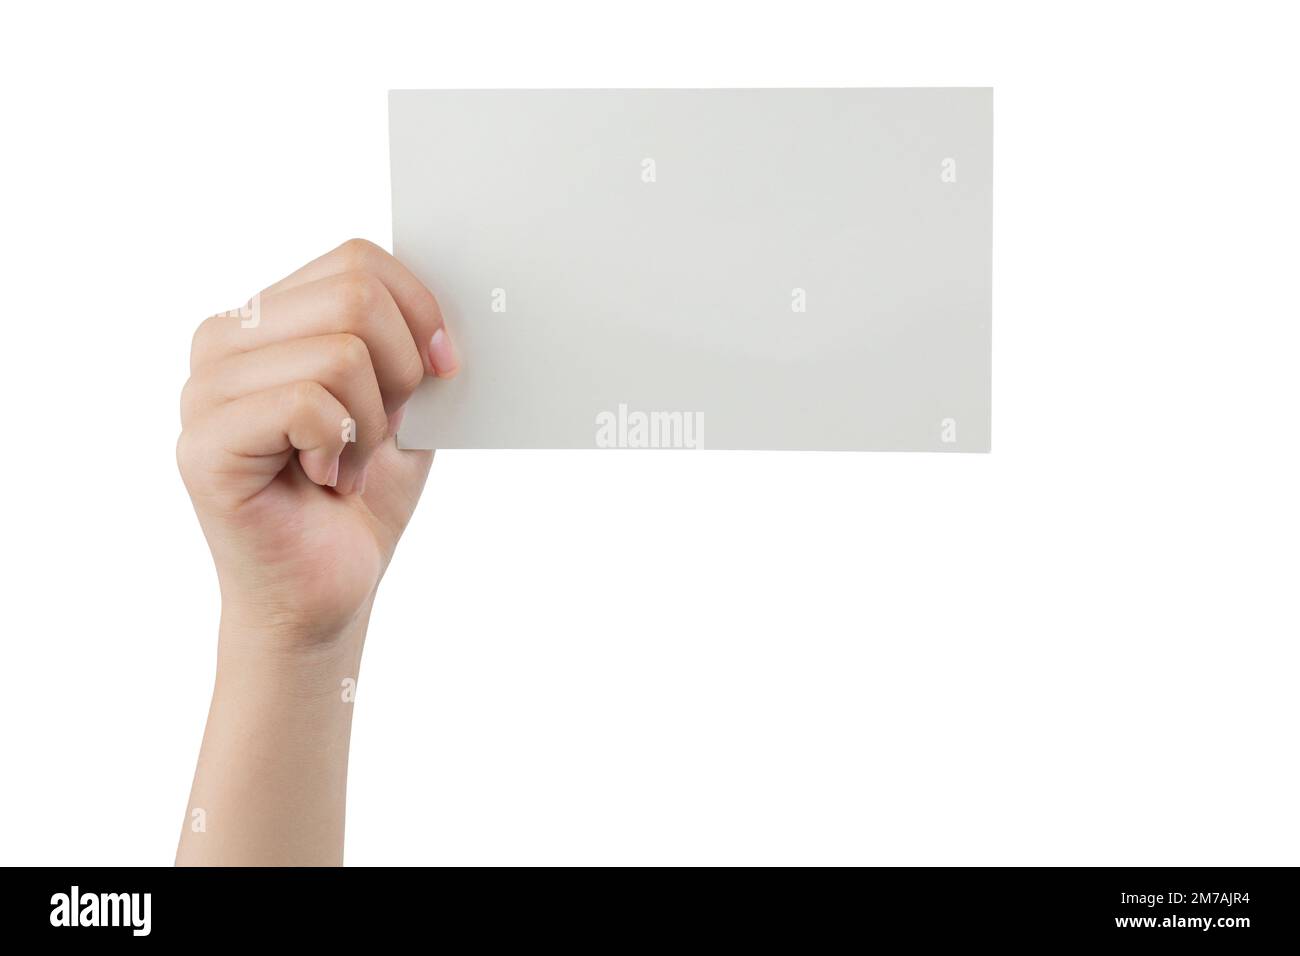 Hand of a young woman holding a white cardboard to mount an image or advertising text, with a white background. Stock Photo